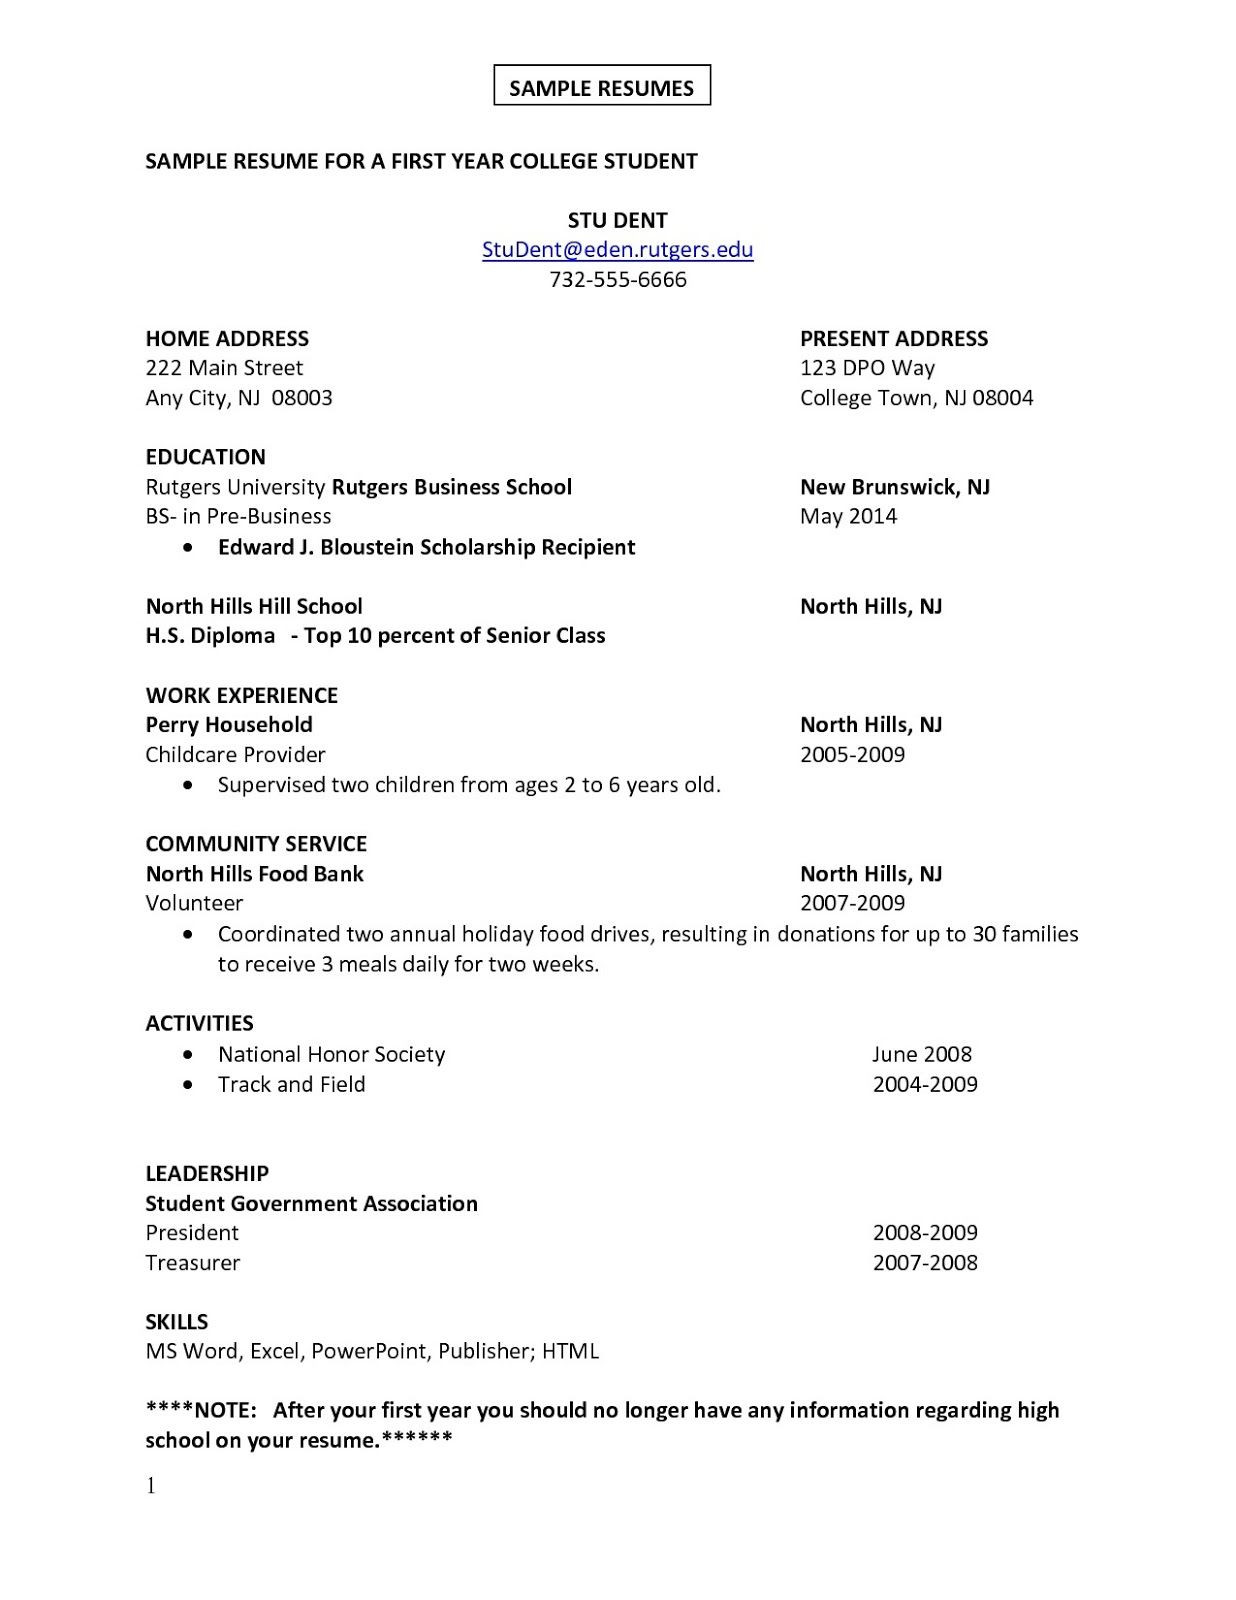 Sample Resume for First Year College Student First Job Sample Resume Sample Resumes Job Resume Examples …